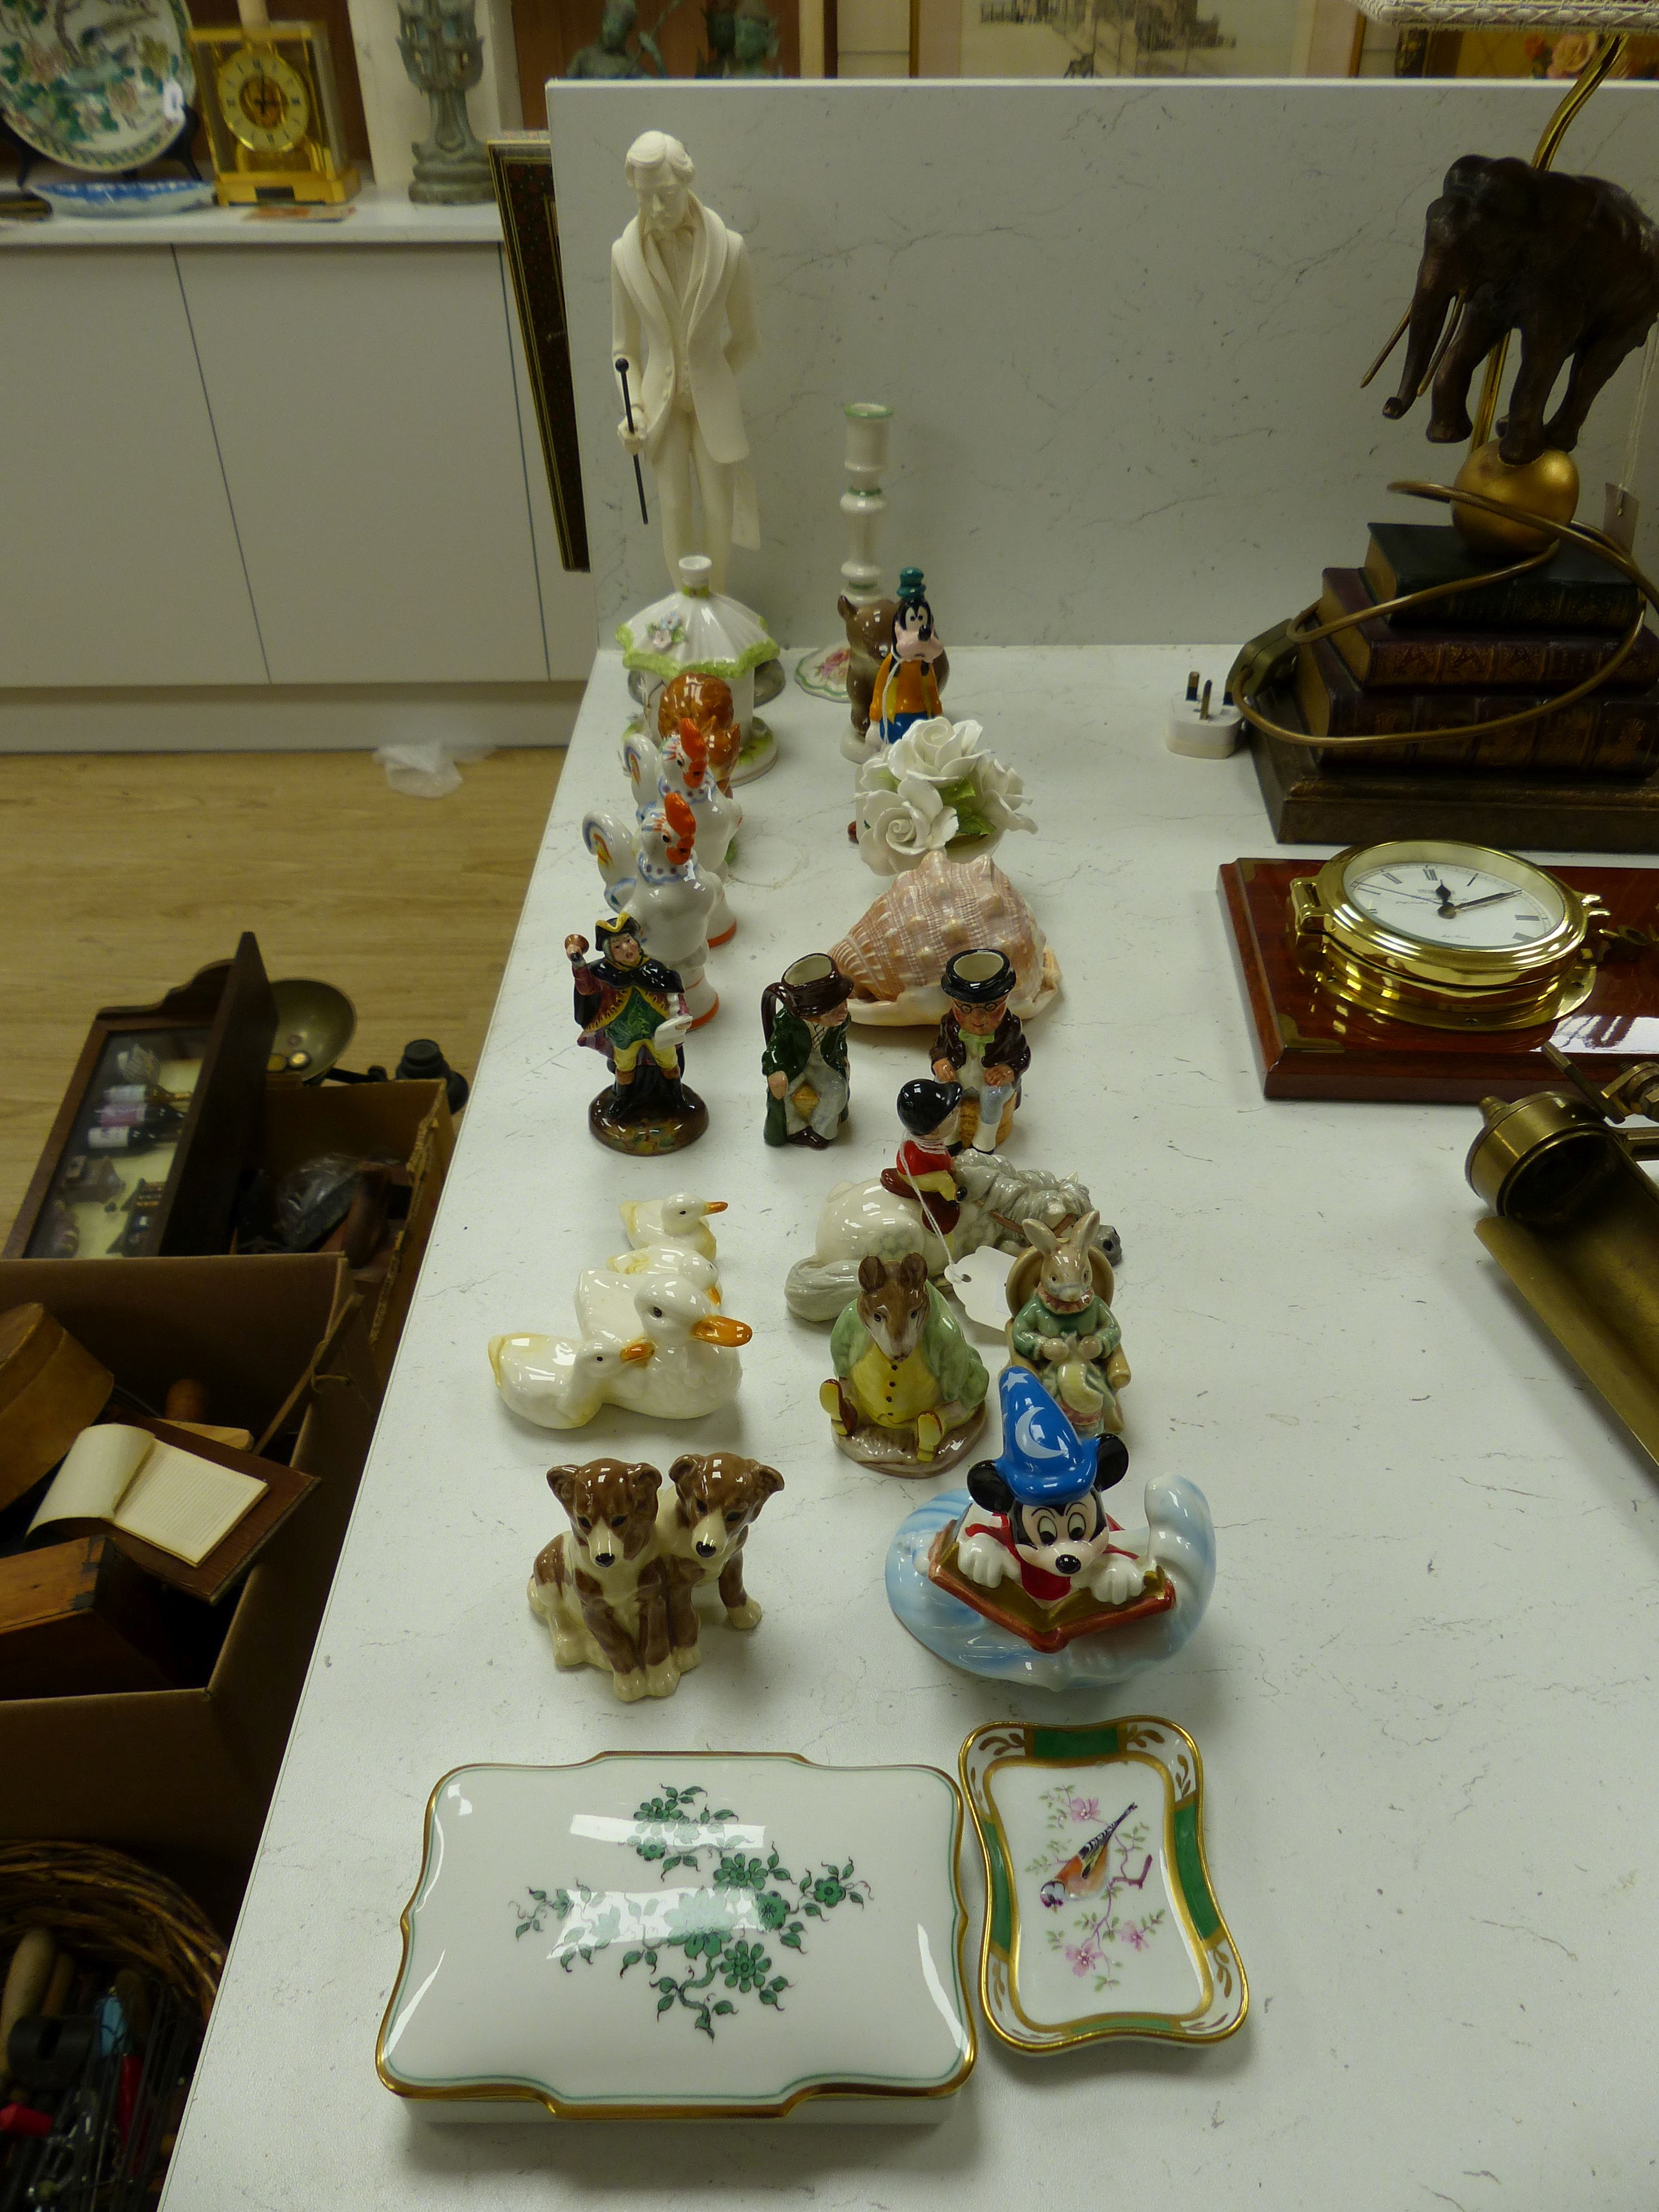 Two Beatrix Potter figures, Samuel Whiskers and Squirrel Nutkin, two Disney figures and sundry decorative items